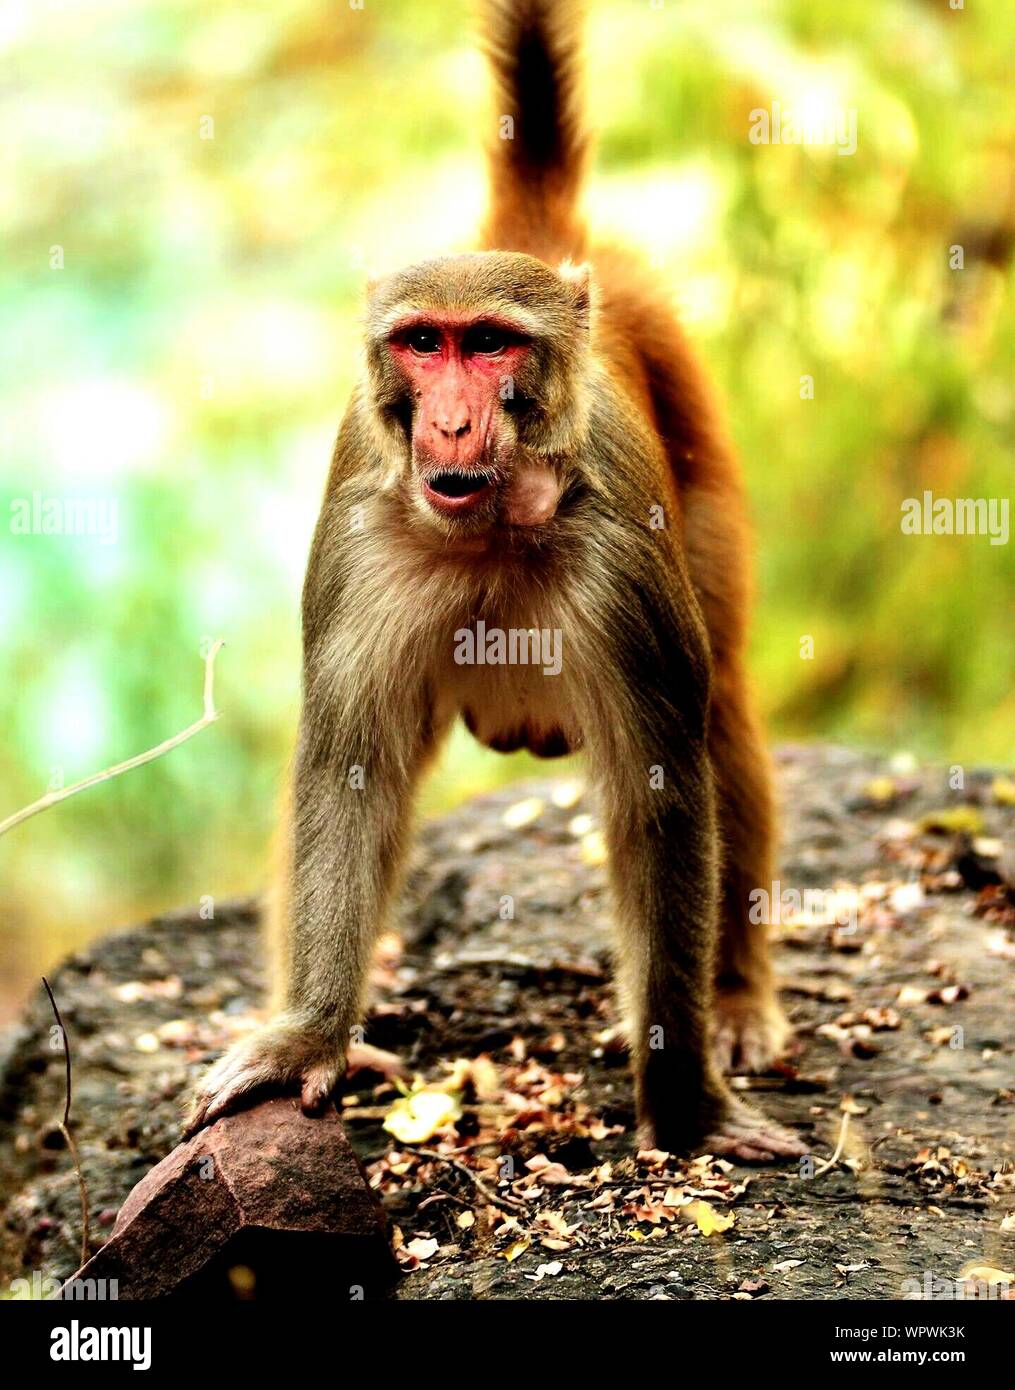 Close-up Of Alert Monkey Standing On Rock Stock Photo